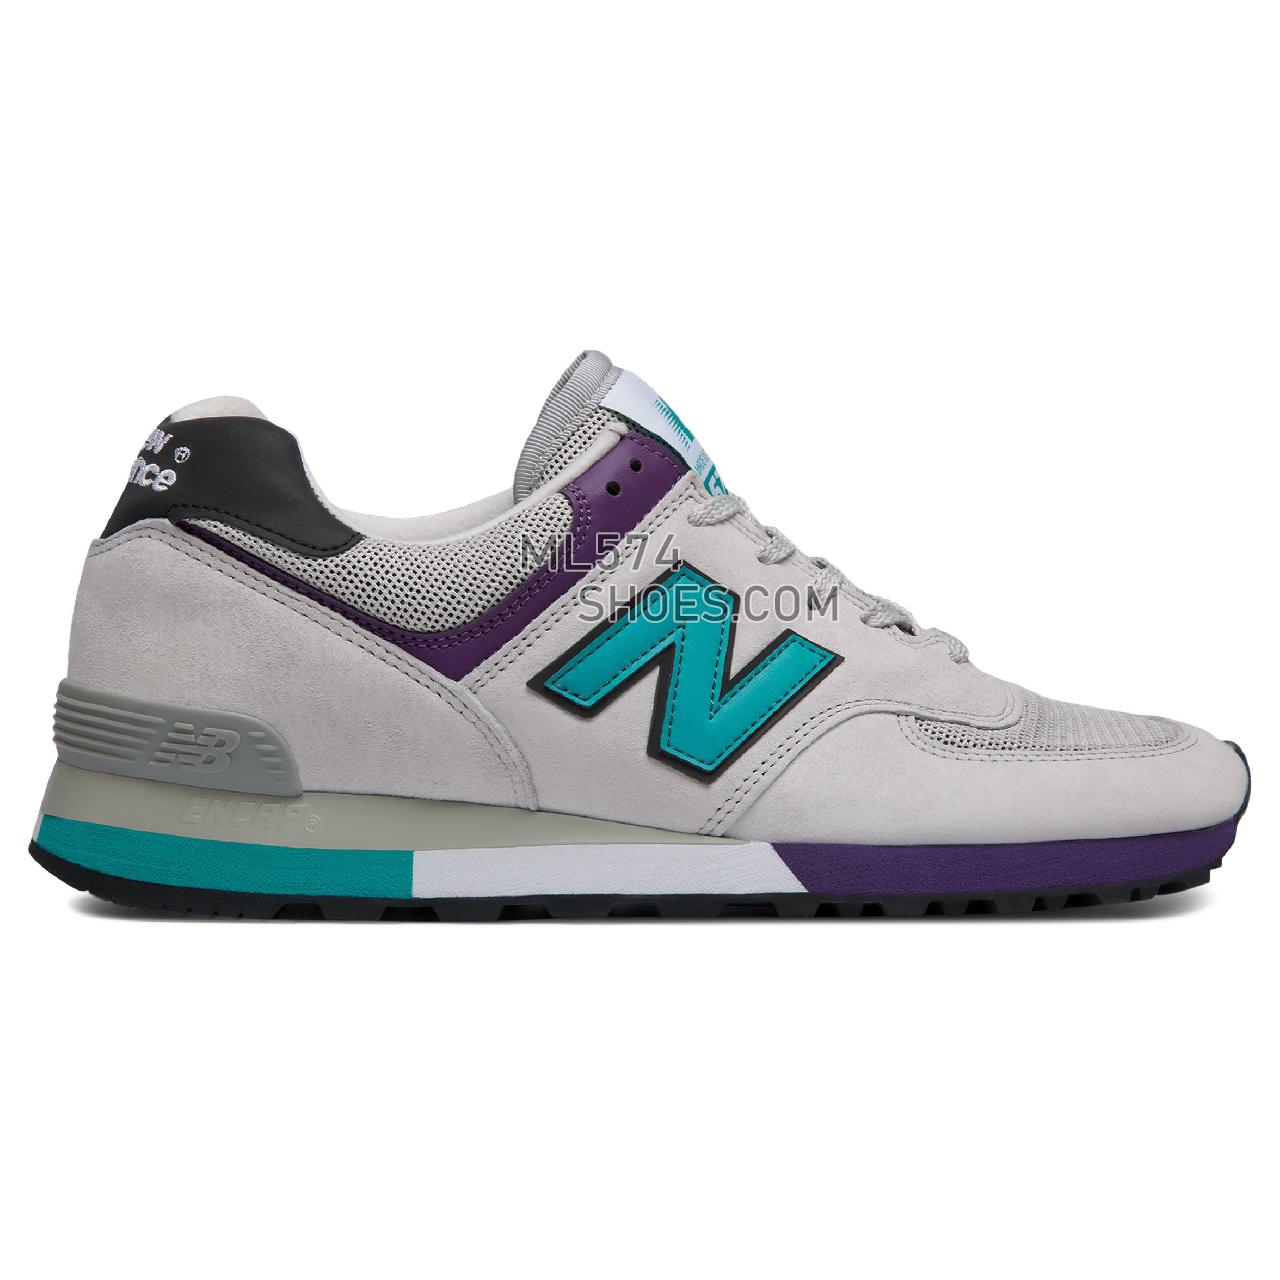 New Balance 576 Made in UK - Men's 576 - Classic Off White with Teal - OM576GPM